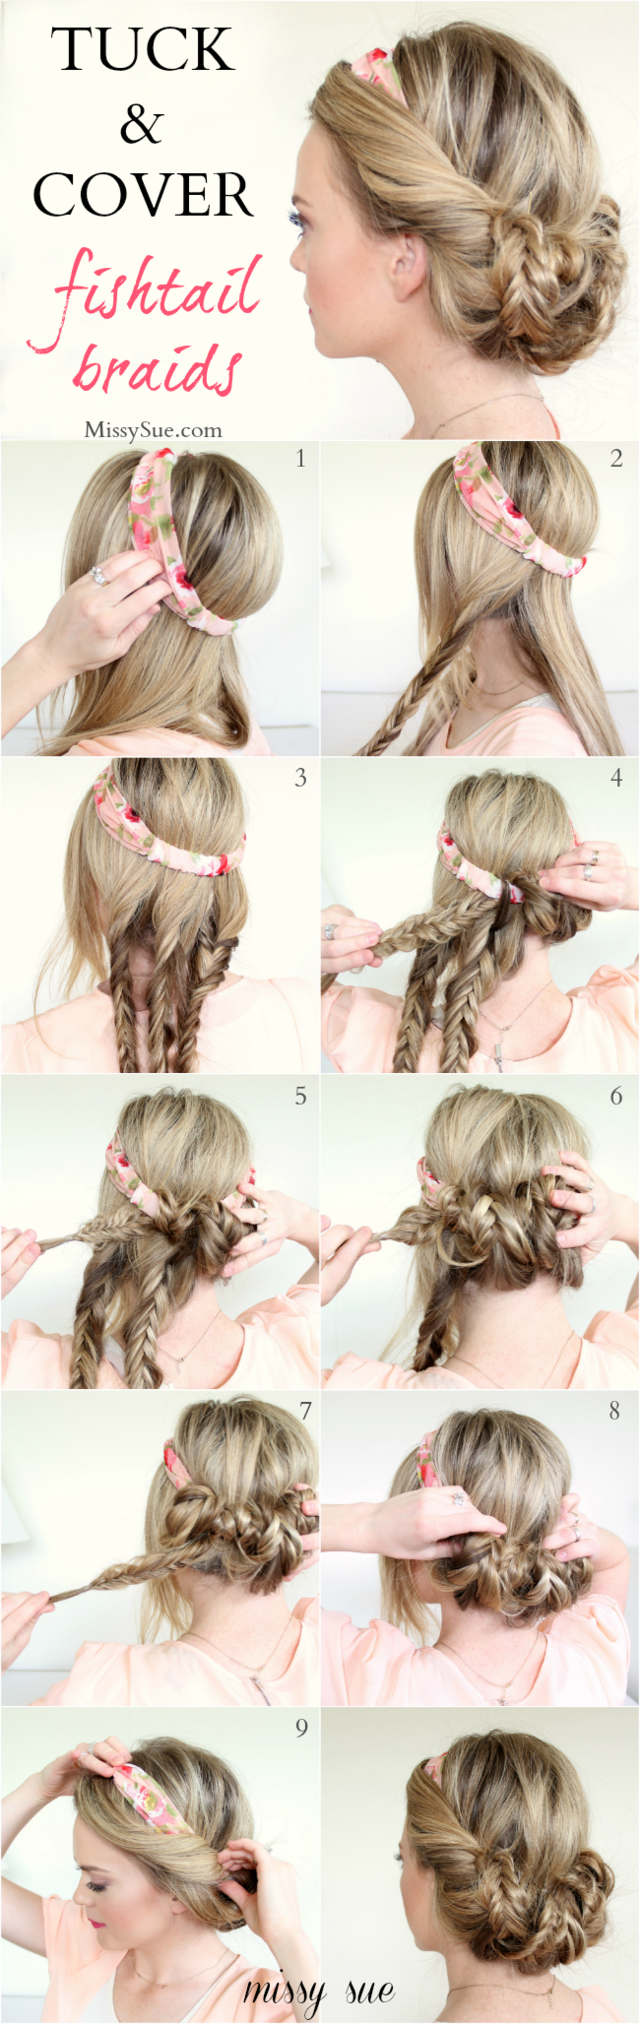 1440499125 102523 diy tuck and cover fishtail braids